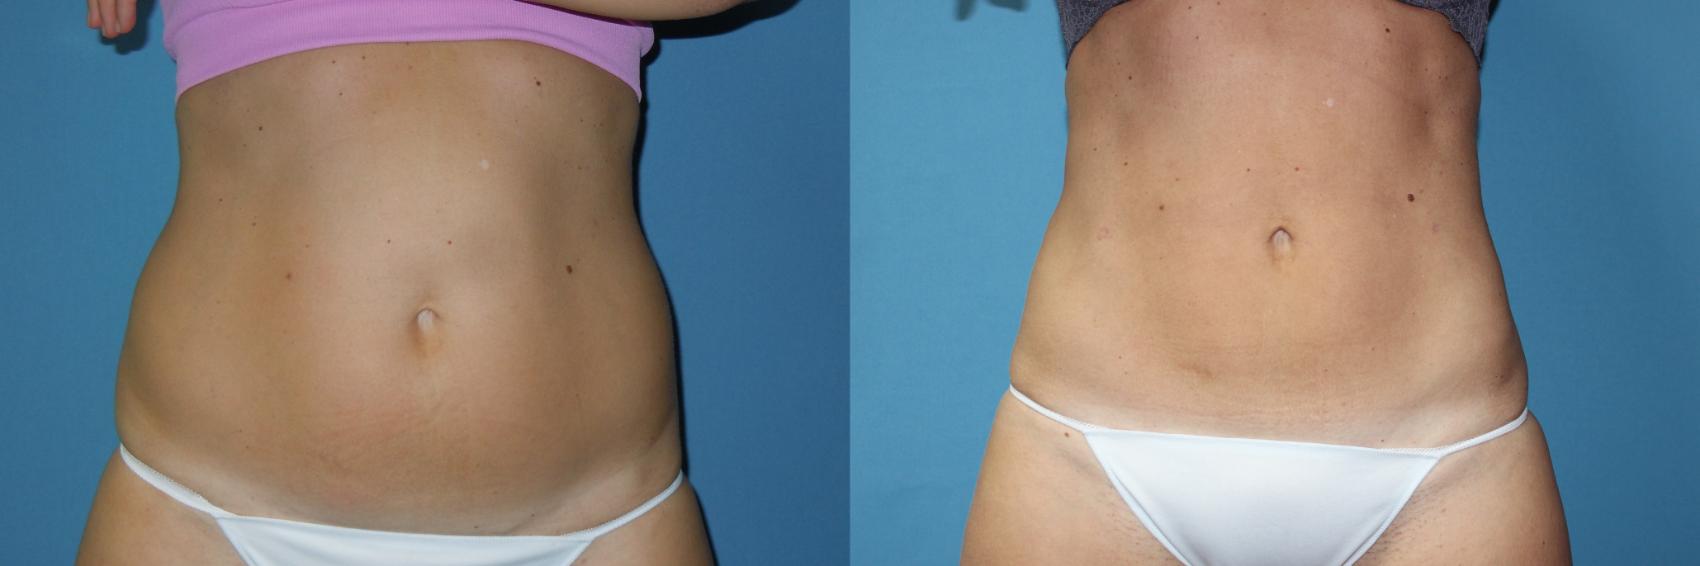 Before & After Liposuction - Abdomen / Flanks Case 172 Front View in Coeur d'Alene, ID